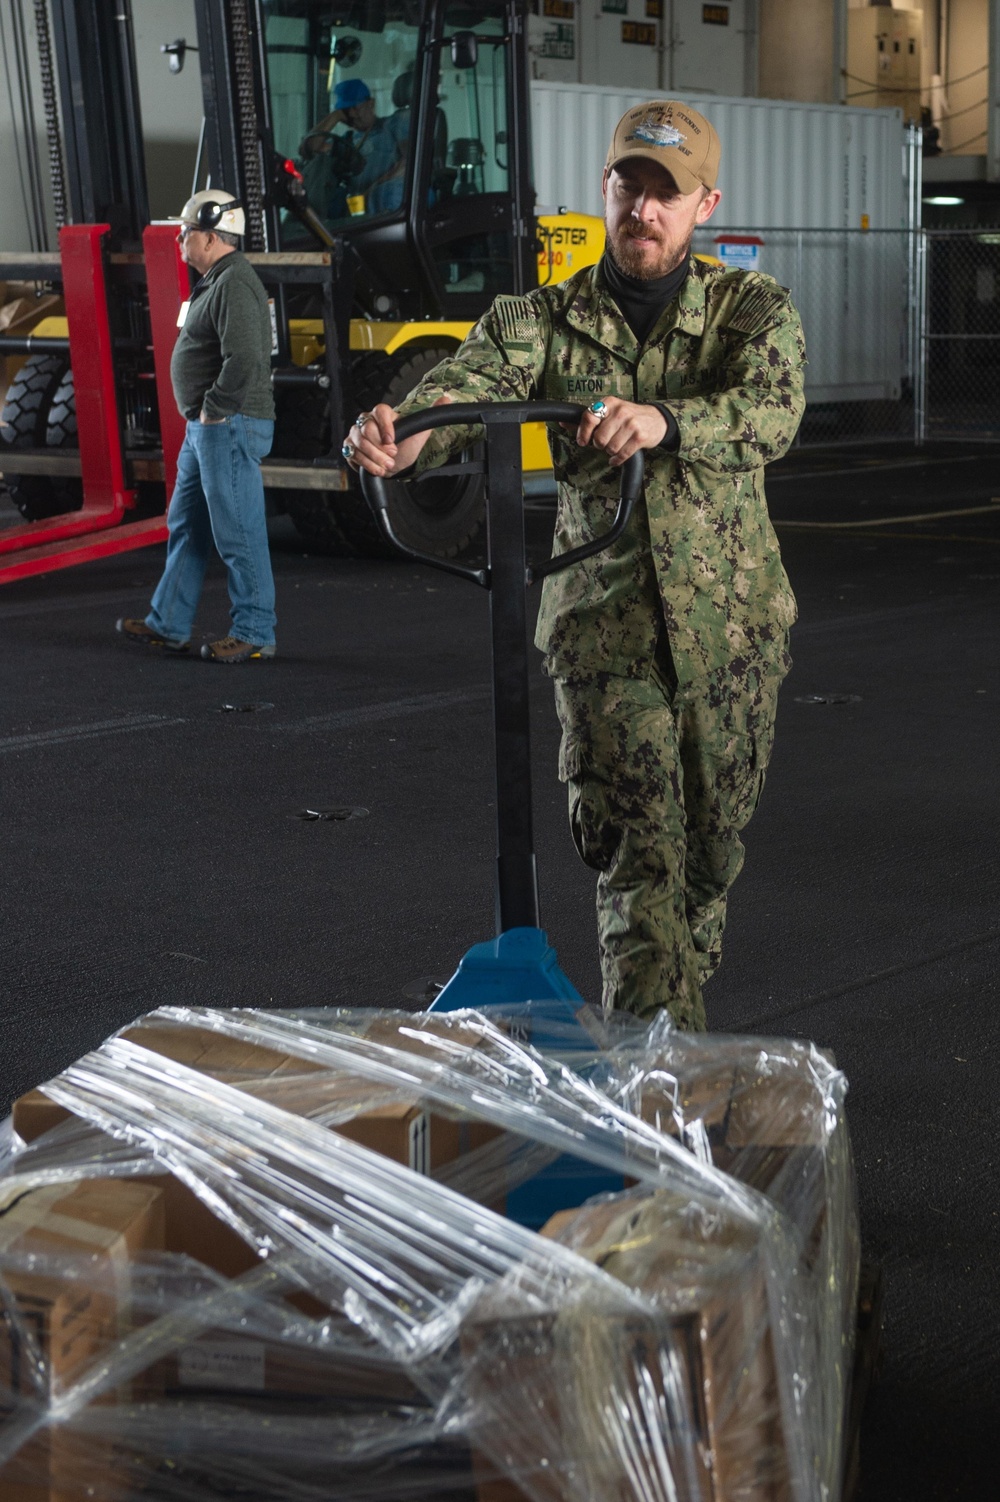 U.S. Navy Aviation Machinist’s Mate 3rd Class Dylan Eaton, from Locus Grove, Oklahoma, moves a pallet in preparation for a hazardous material offload aboard the aircraft carrier USS John C. Stennis (CVN 74) in Norfolk, Virginia, Jan. 14, 2020.